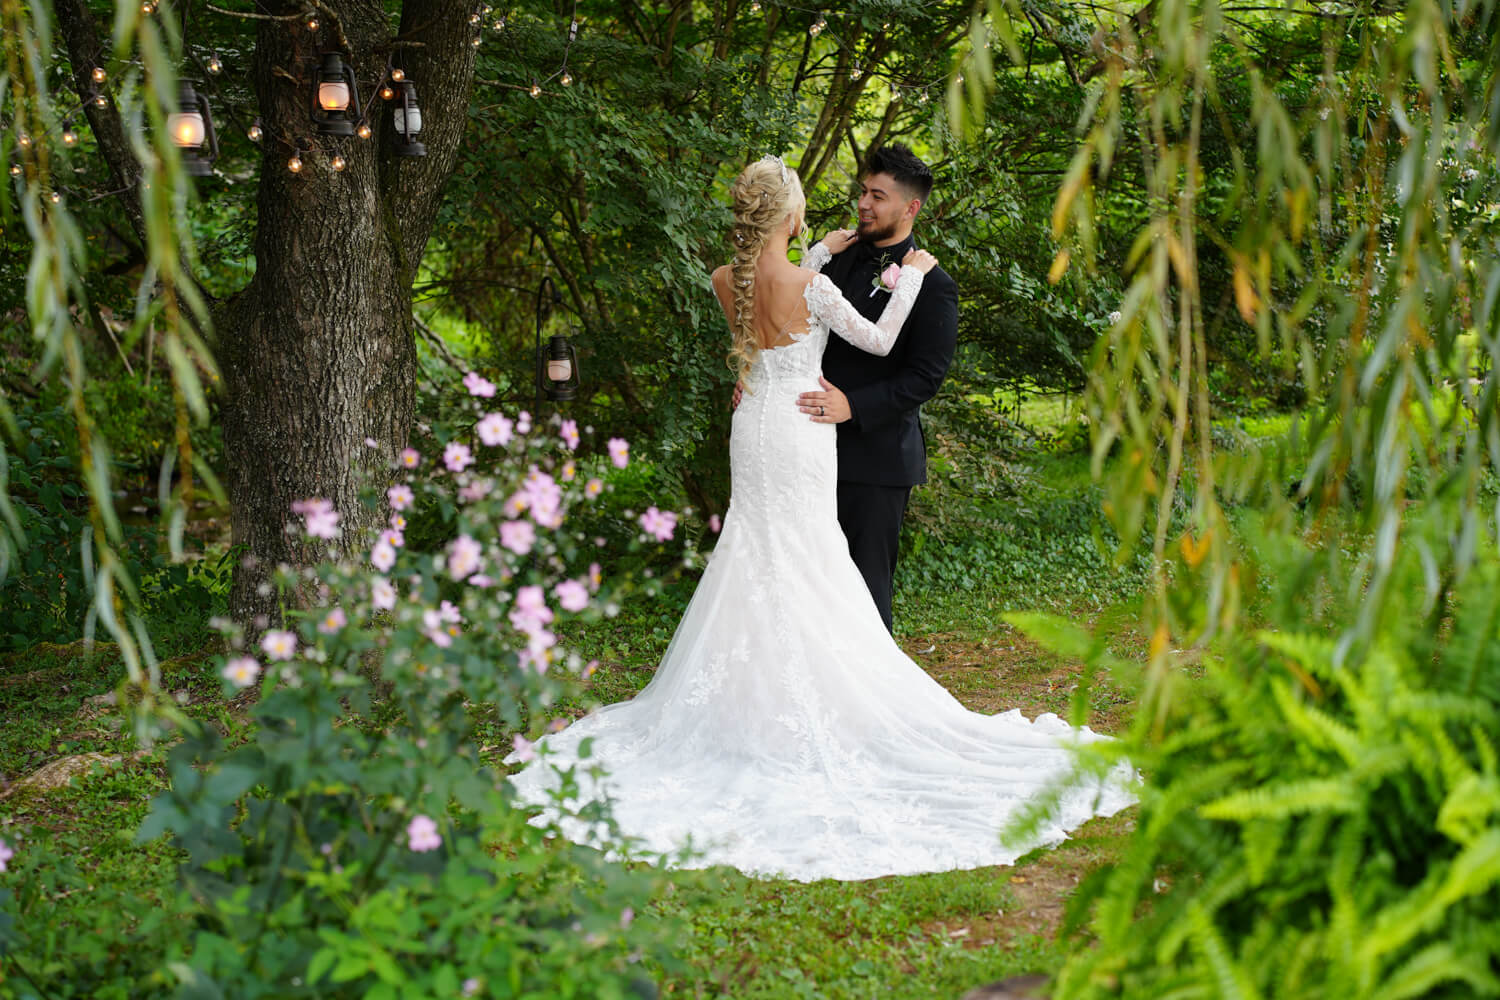 Bride with long train posing with her groom under a willow tree with lanterns and pink windflowers in bloom